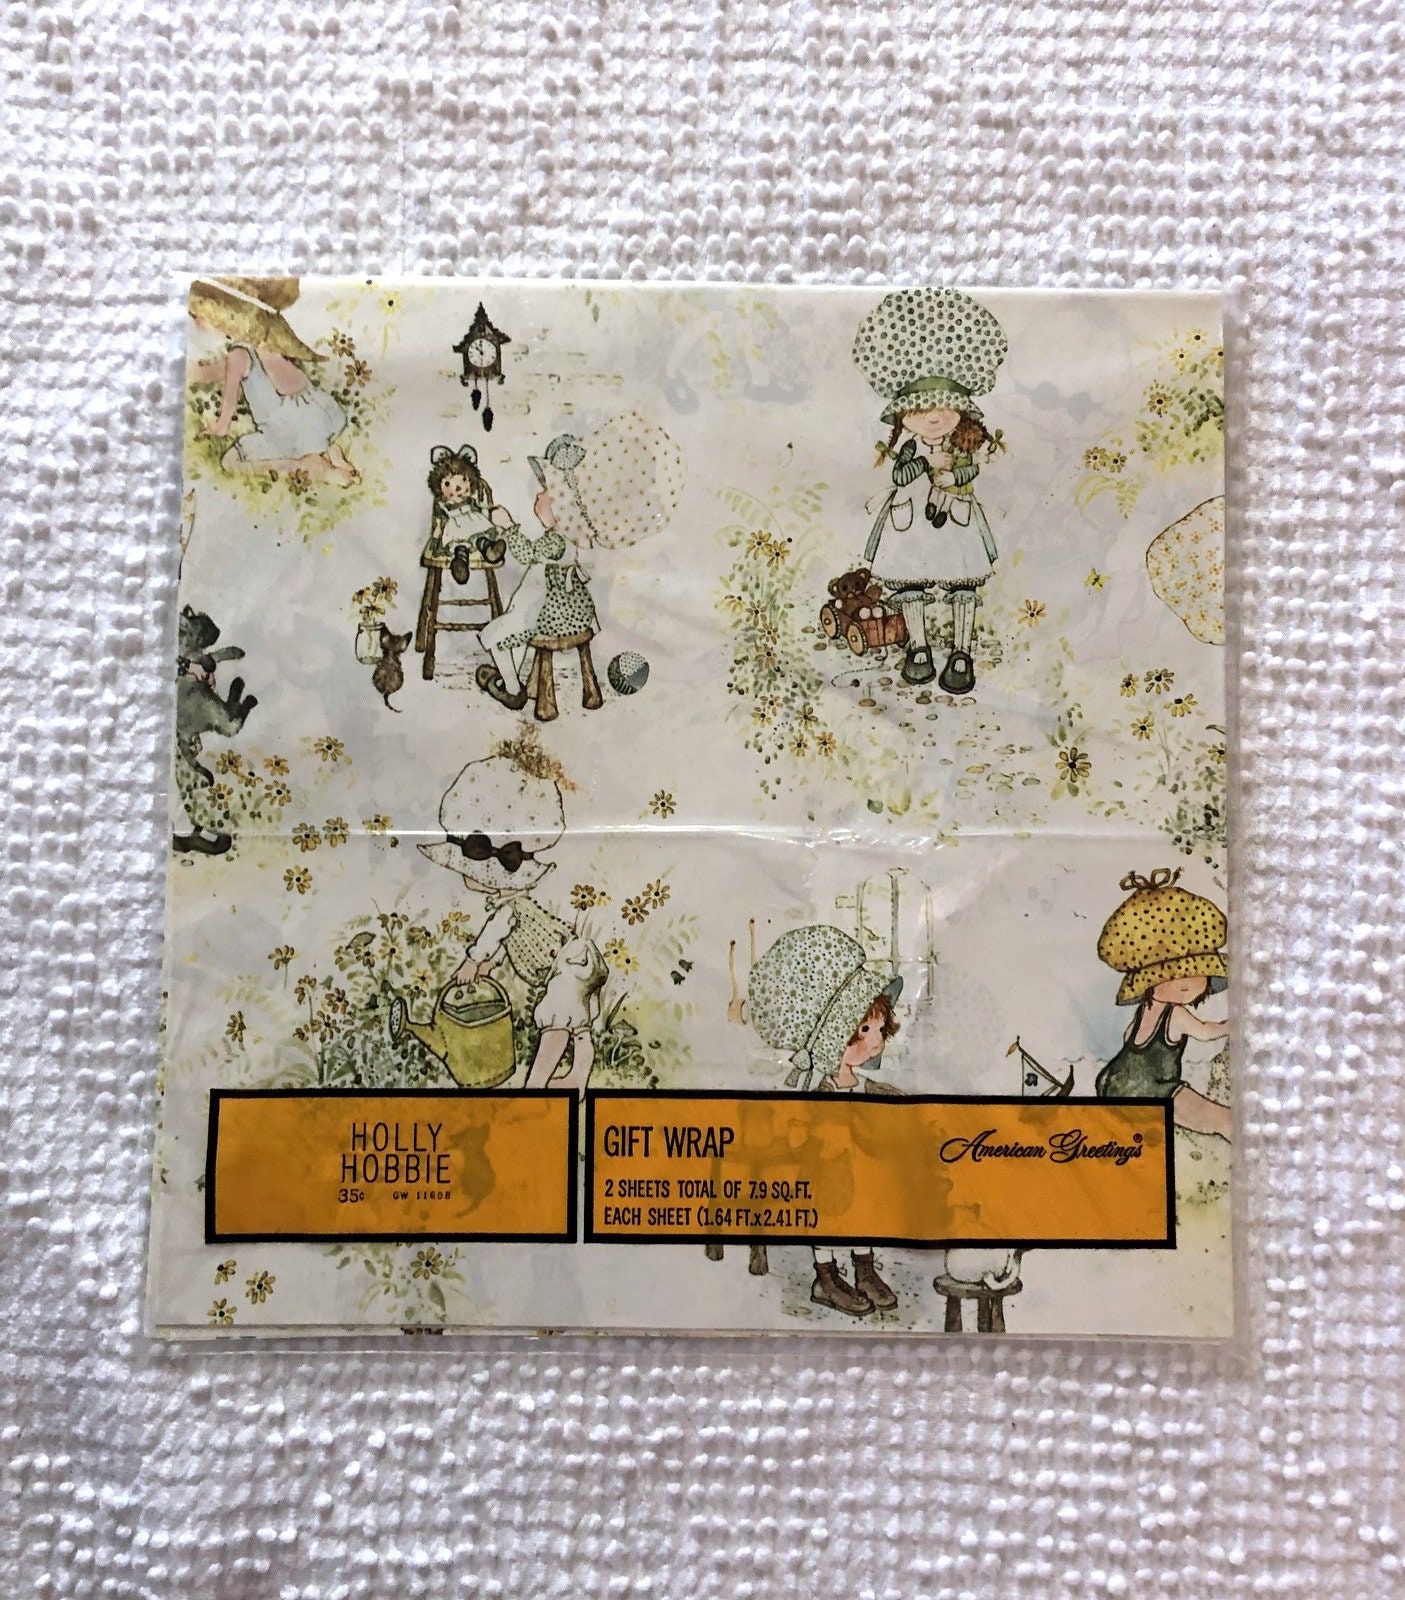 Lot Vtg Holly Hobbie Gift Wrap Sheets 1970s American Greetings 4 Sealed Packages 